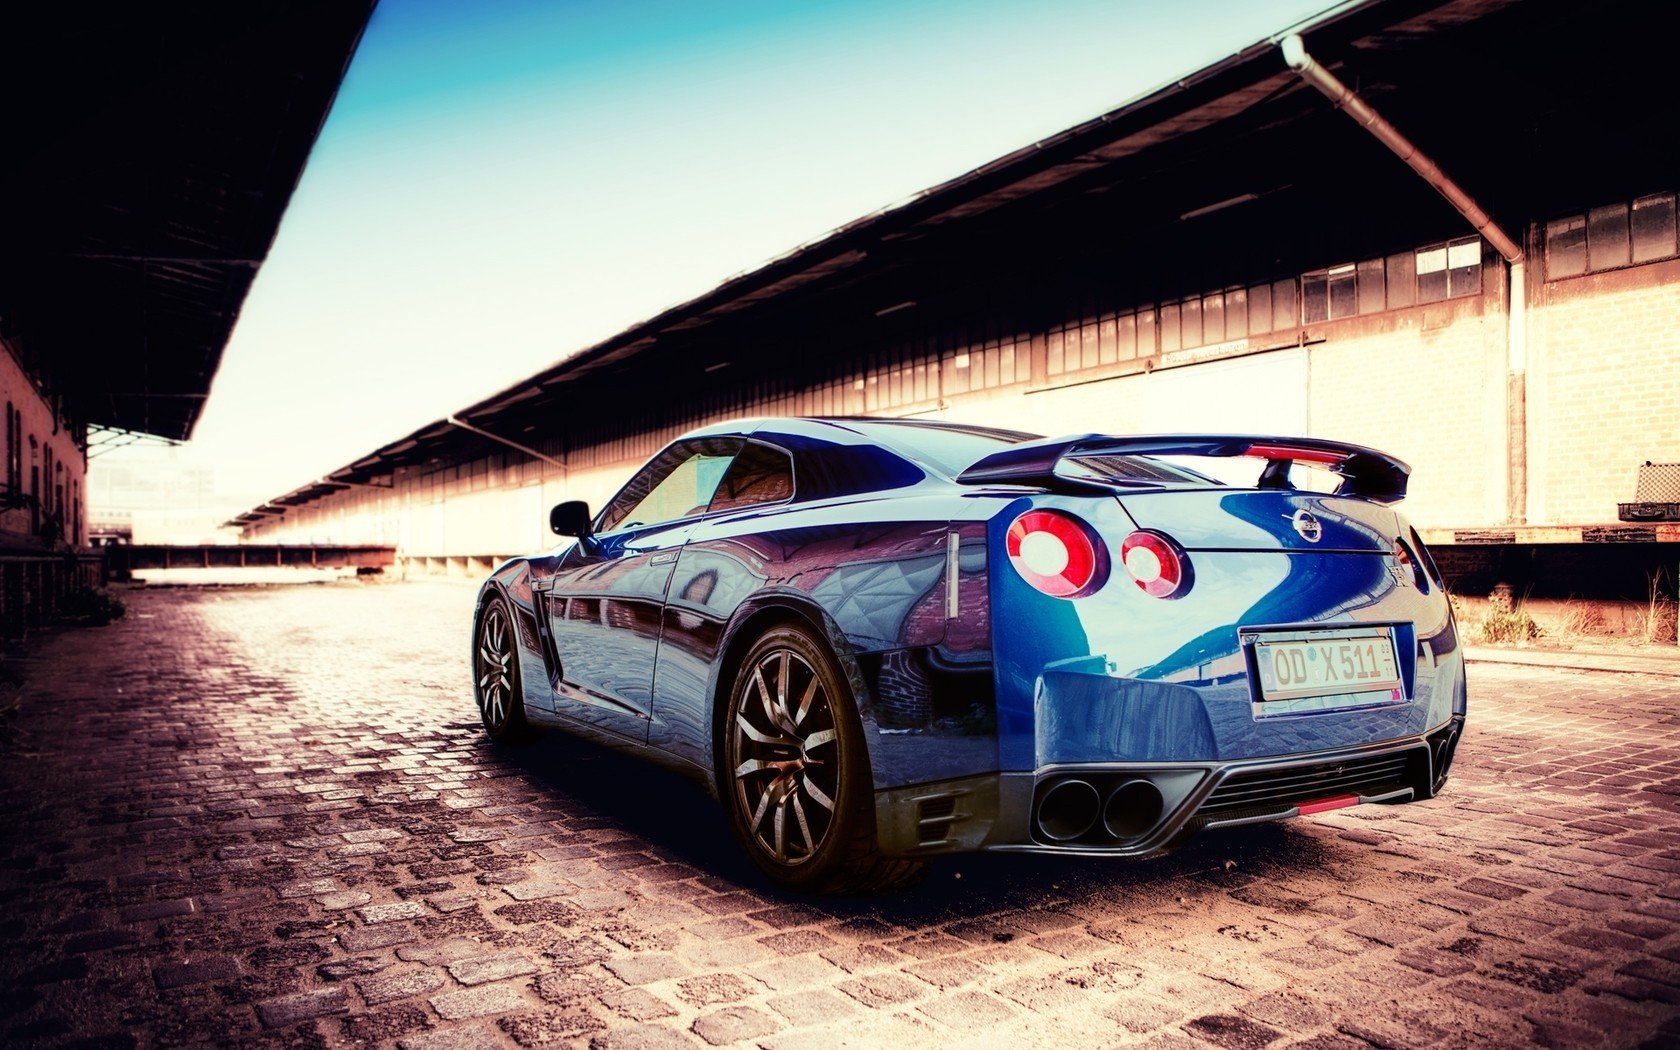 blue, Cars, Nissan, Scenic, Vehicles, Reflections, Blue, Cars, Nissan, Skyline, Gt r, Nissan, Gt r, R35 Wallpaper